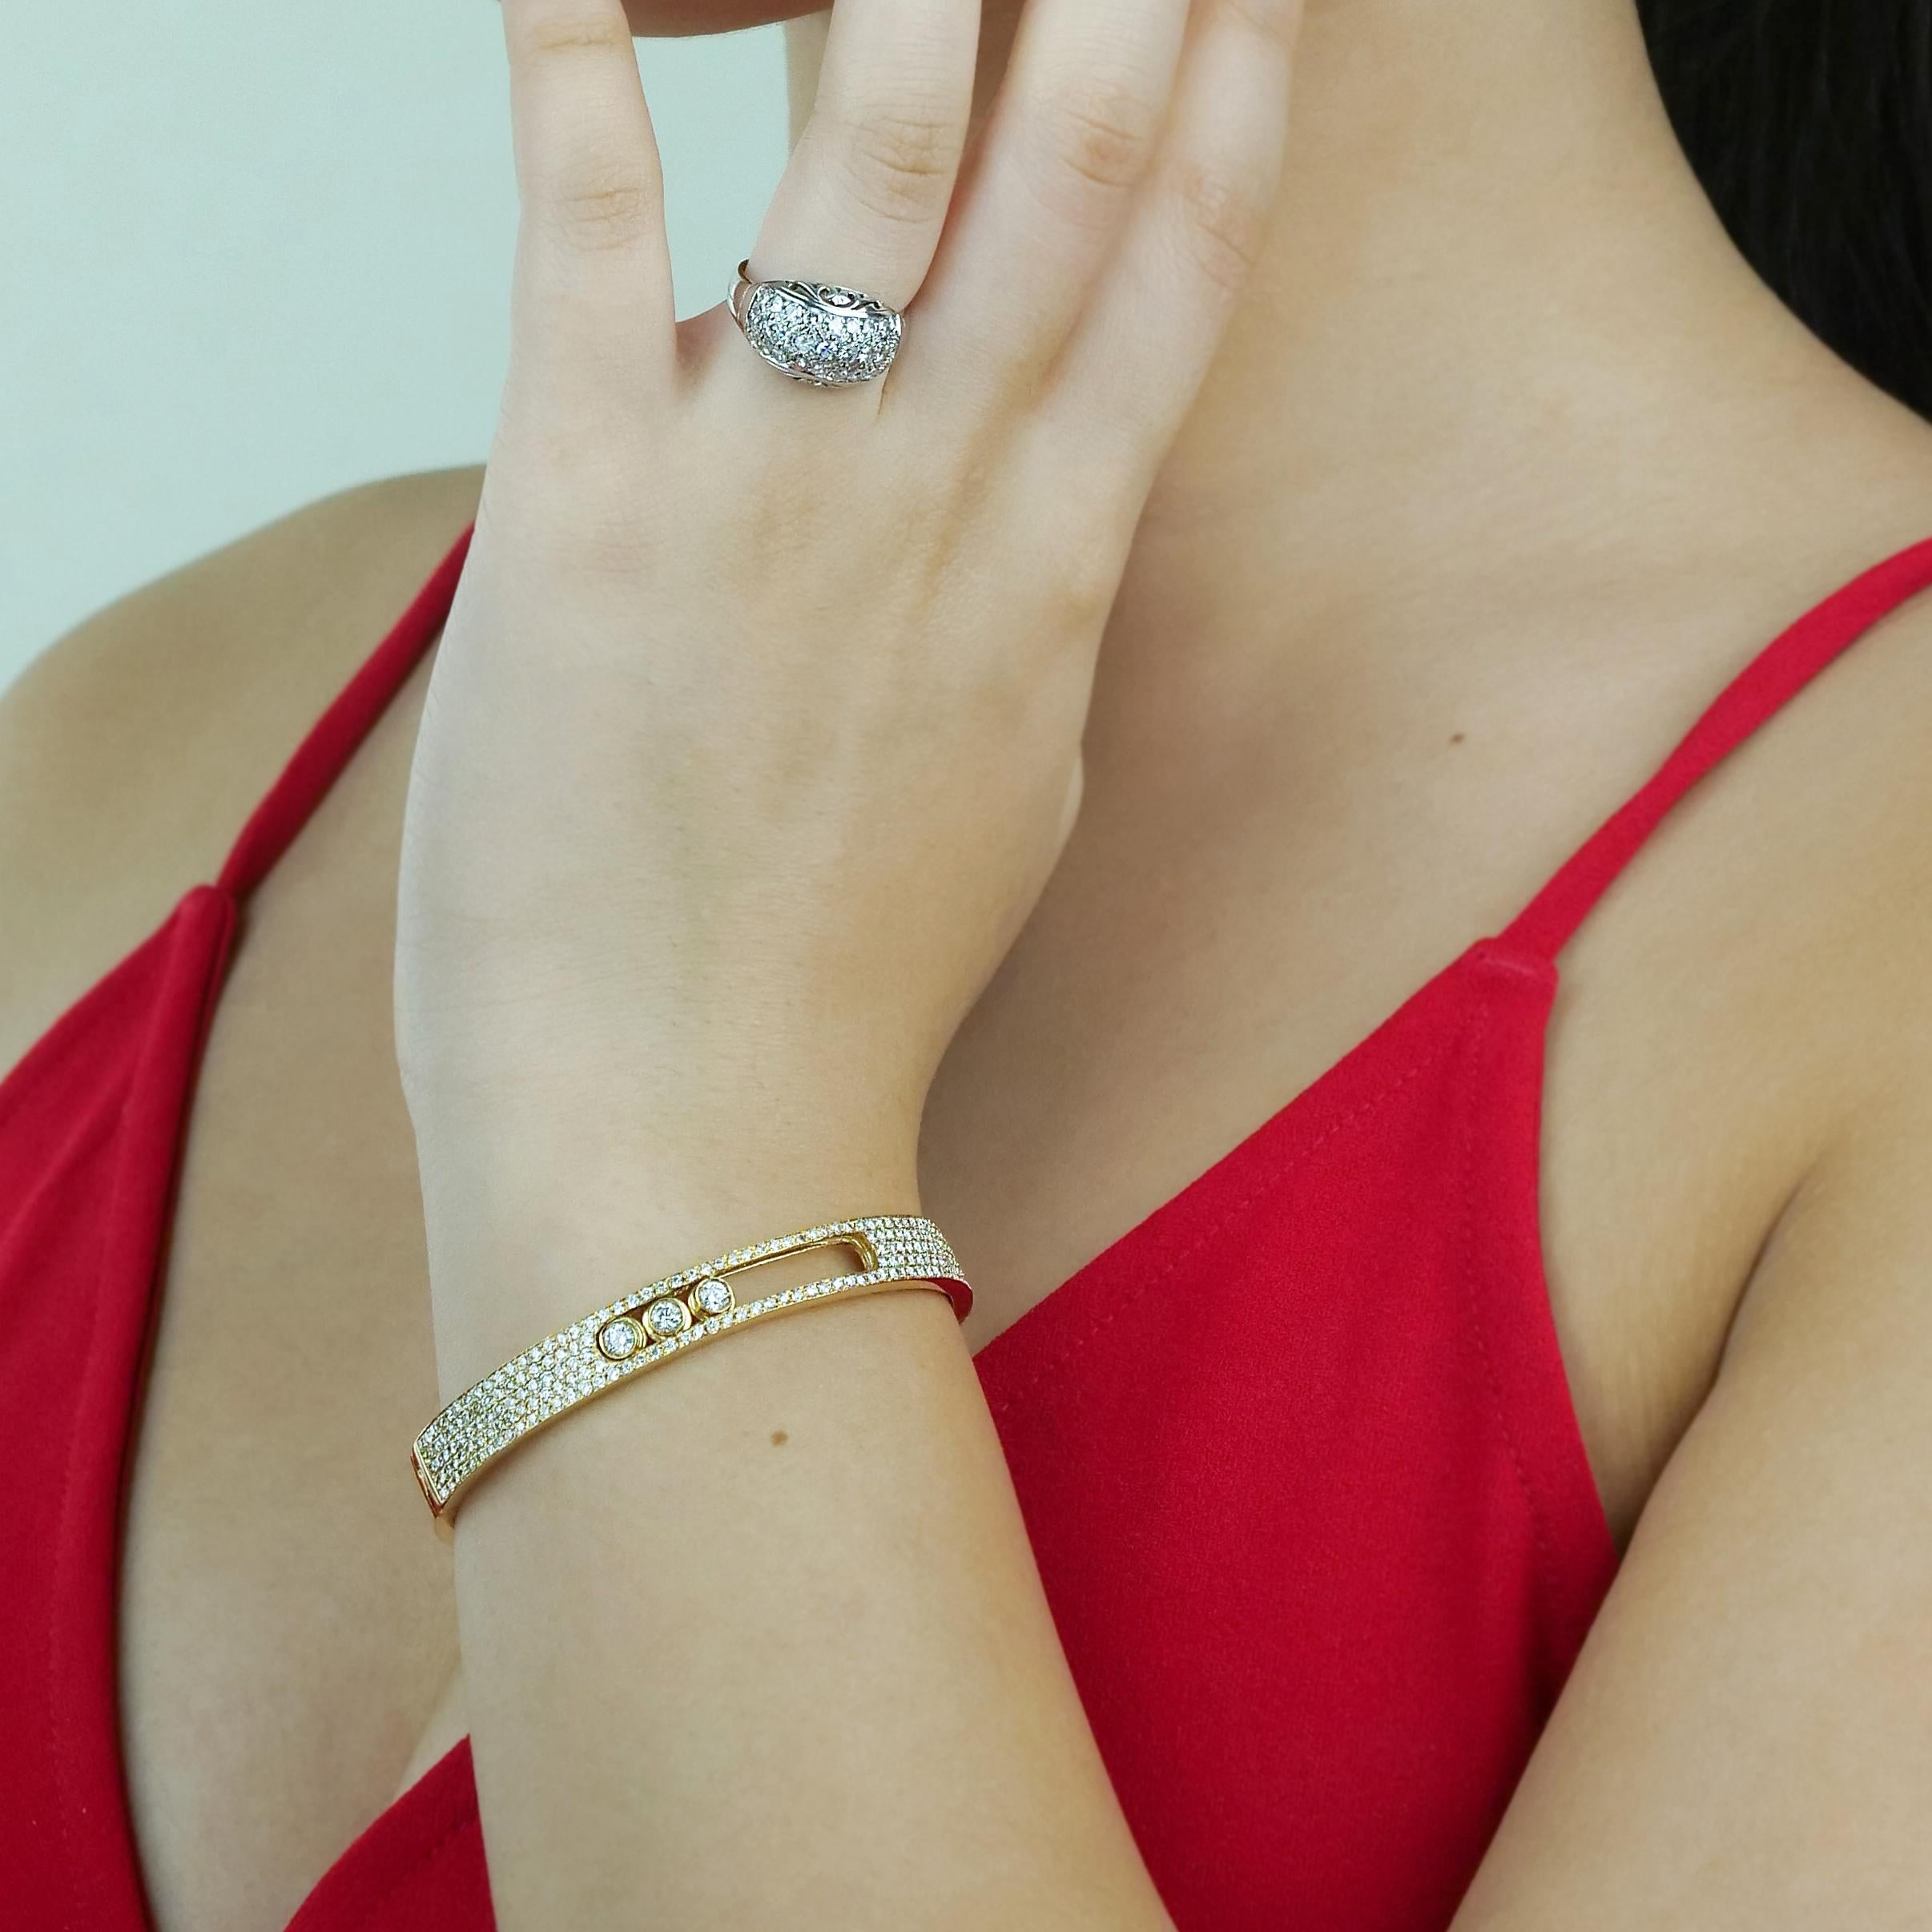 This dynamic bangle consists of three moving diamond centers, held in a frame of smaller diamonds. Set in 18ct yellow gold, it compliments with warmth, the cool white glittering brilliant cut diamonds for a beautiful and unique design.

Round